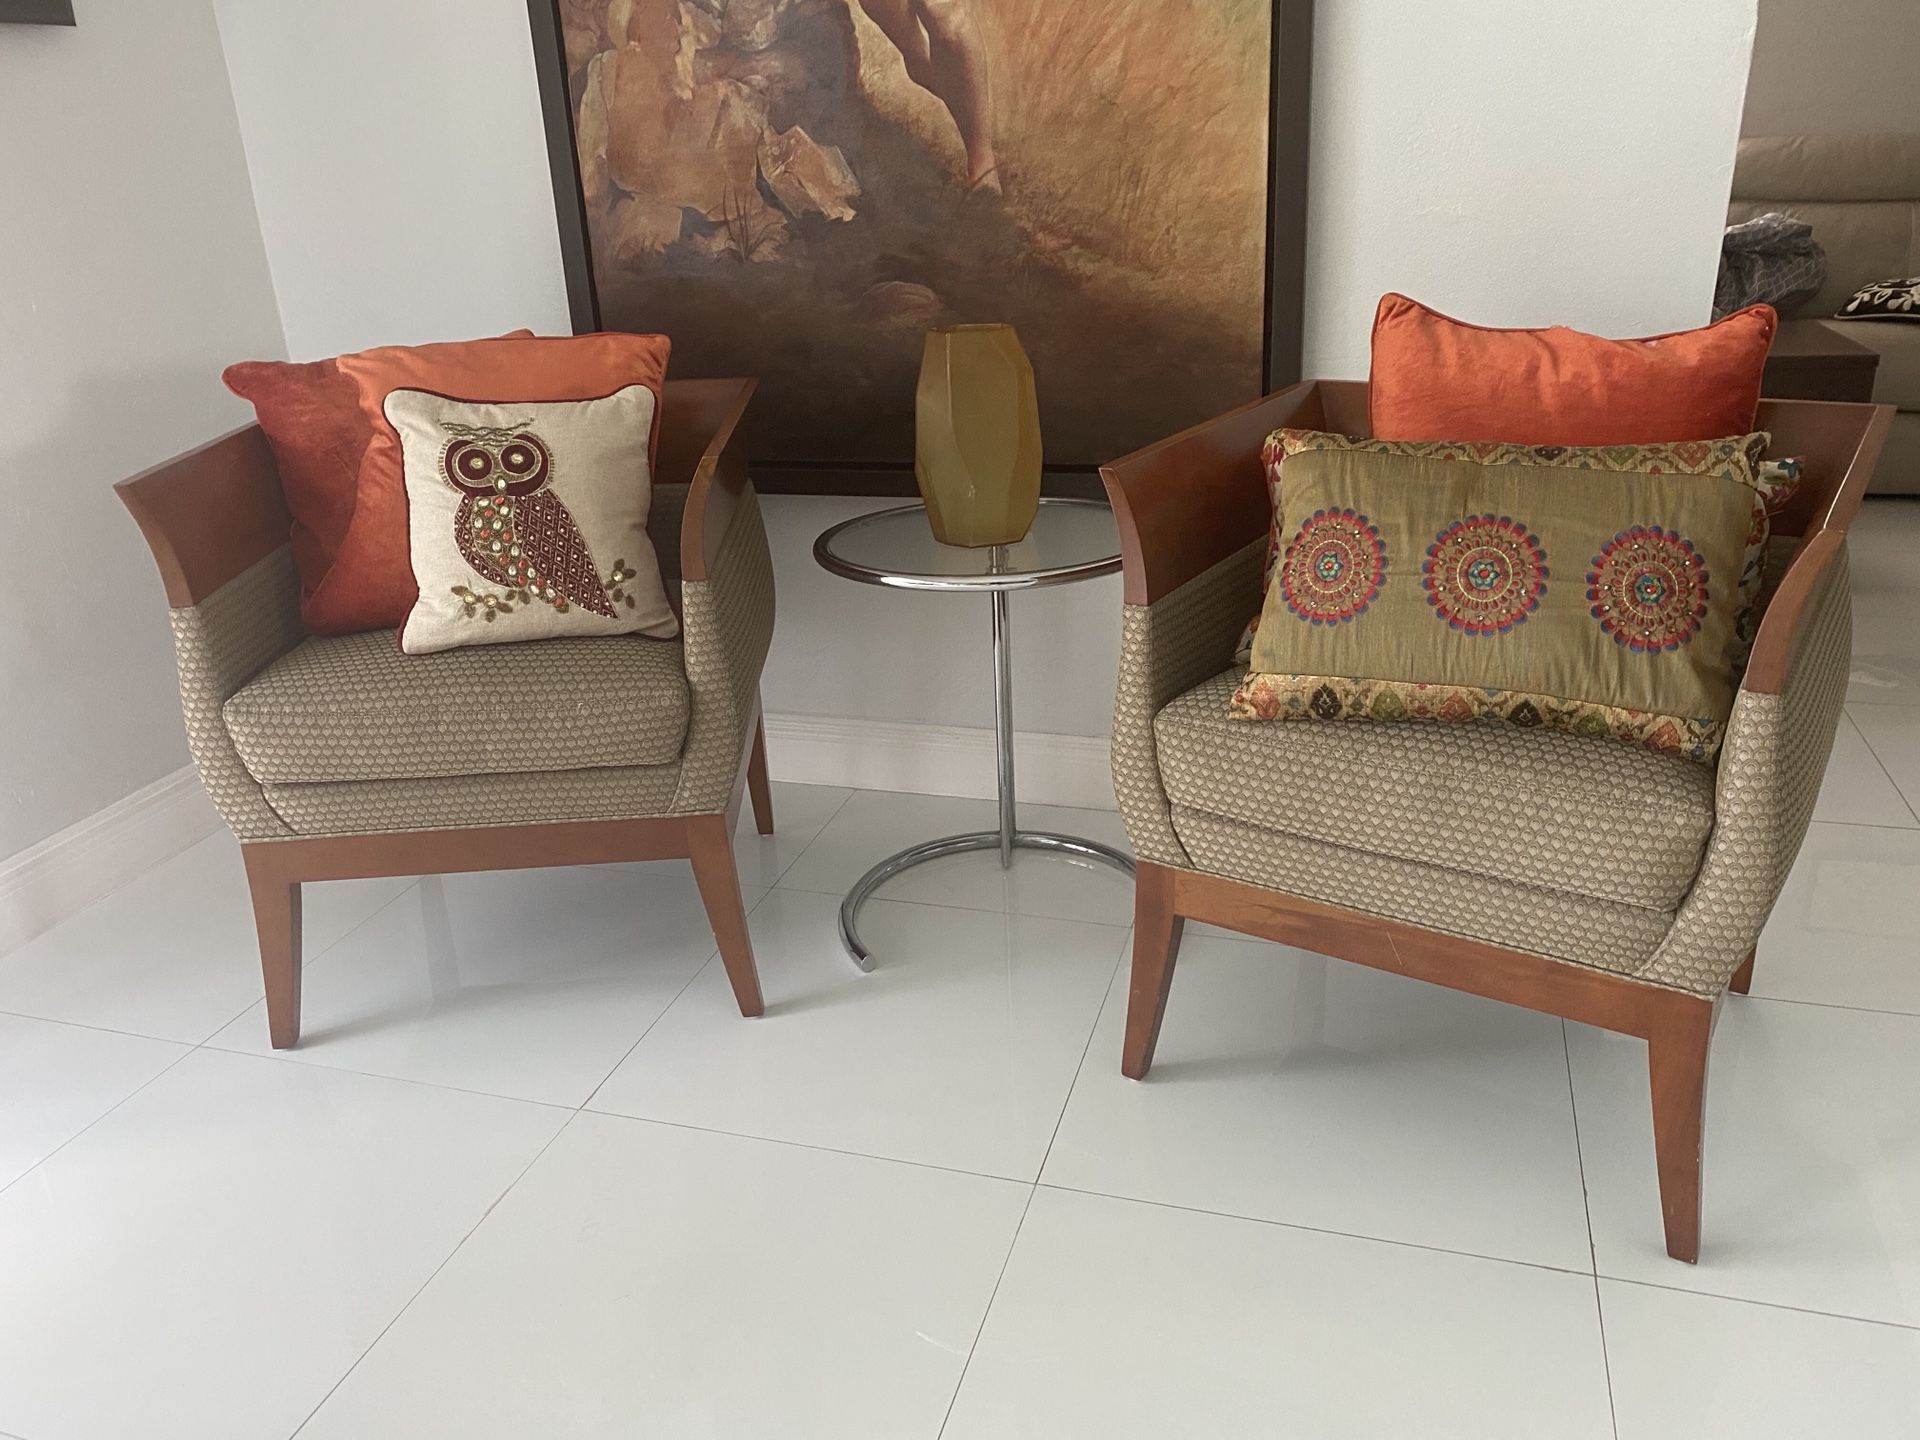 Designer wooden and fabric chairs. 2 of them. Sold separately or as a pair.